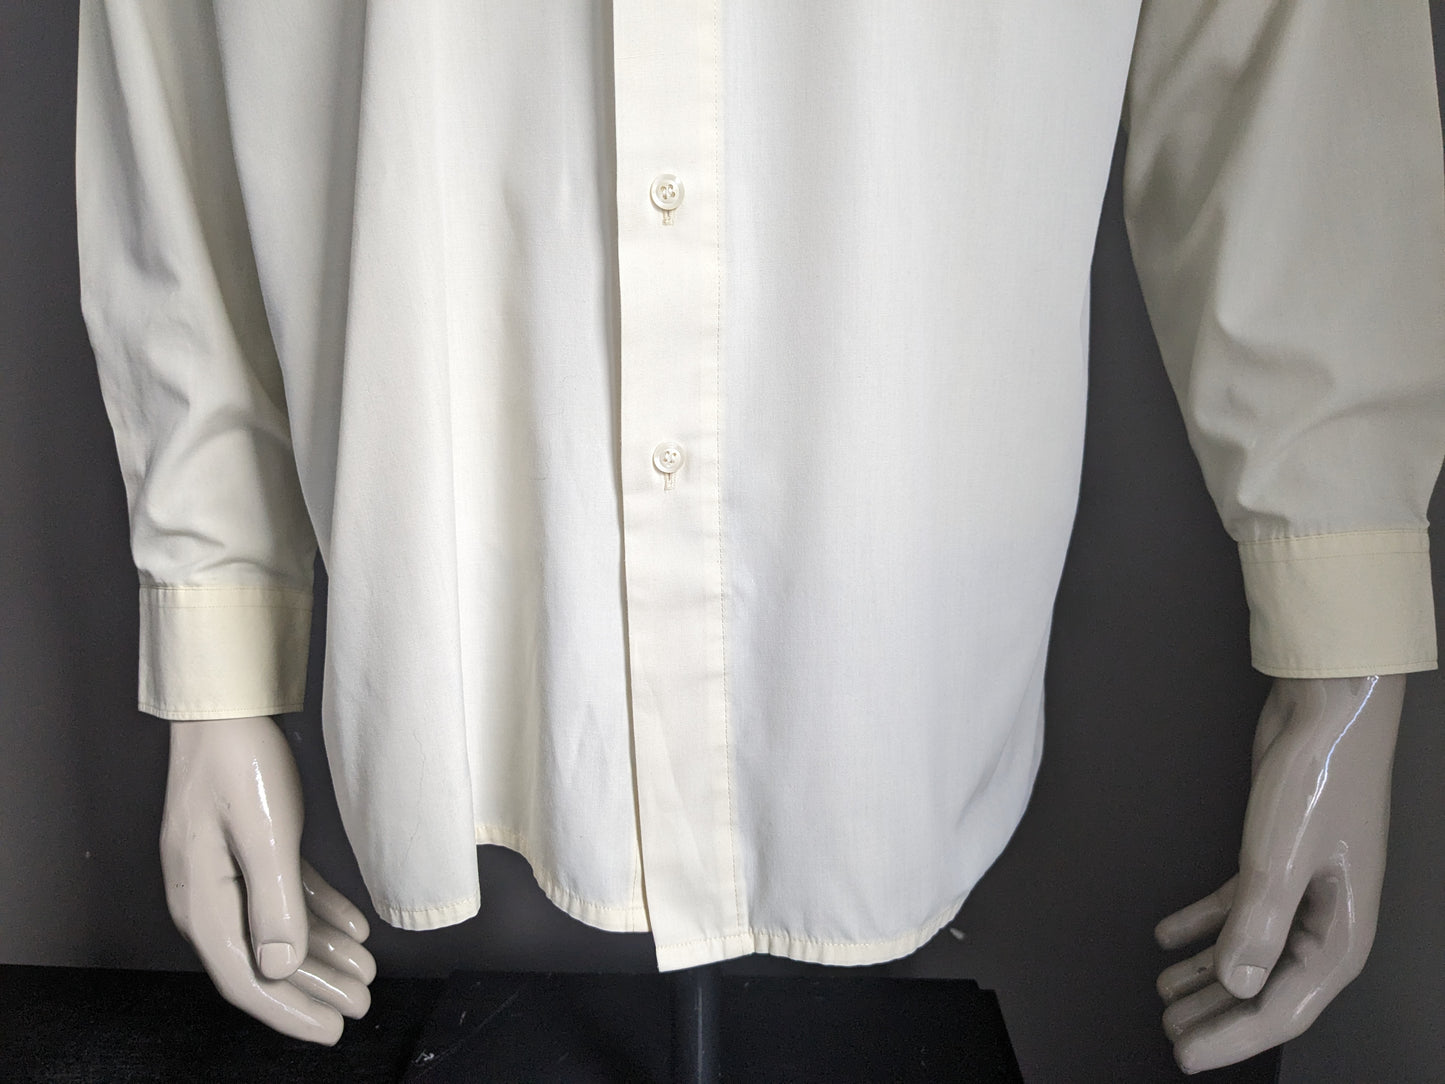 Vintage 70's Marcello shirt with point collar. Light yellow colored. Size XL.